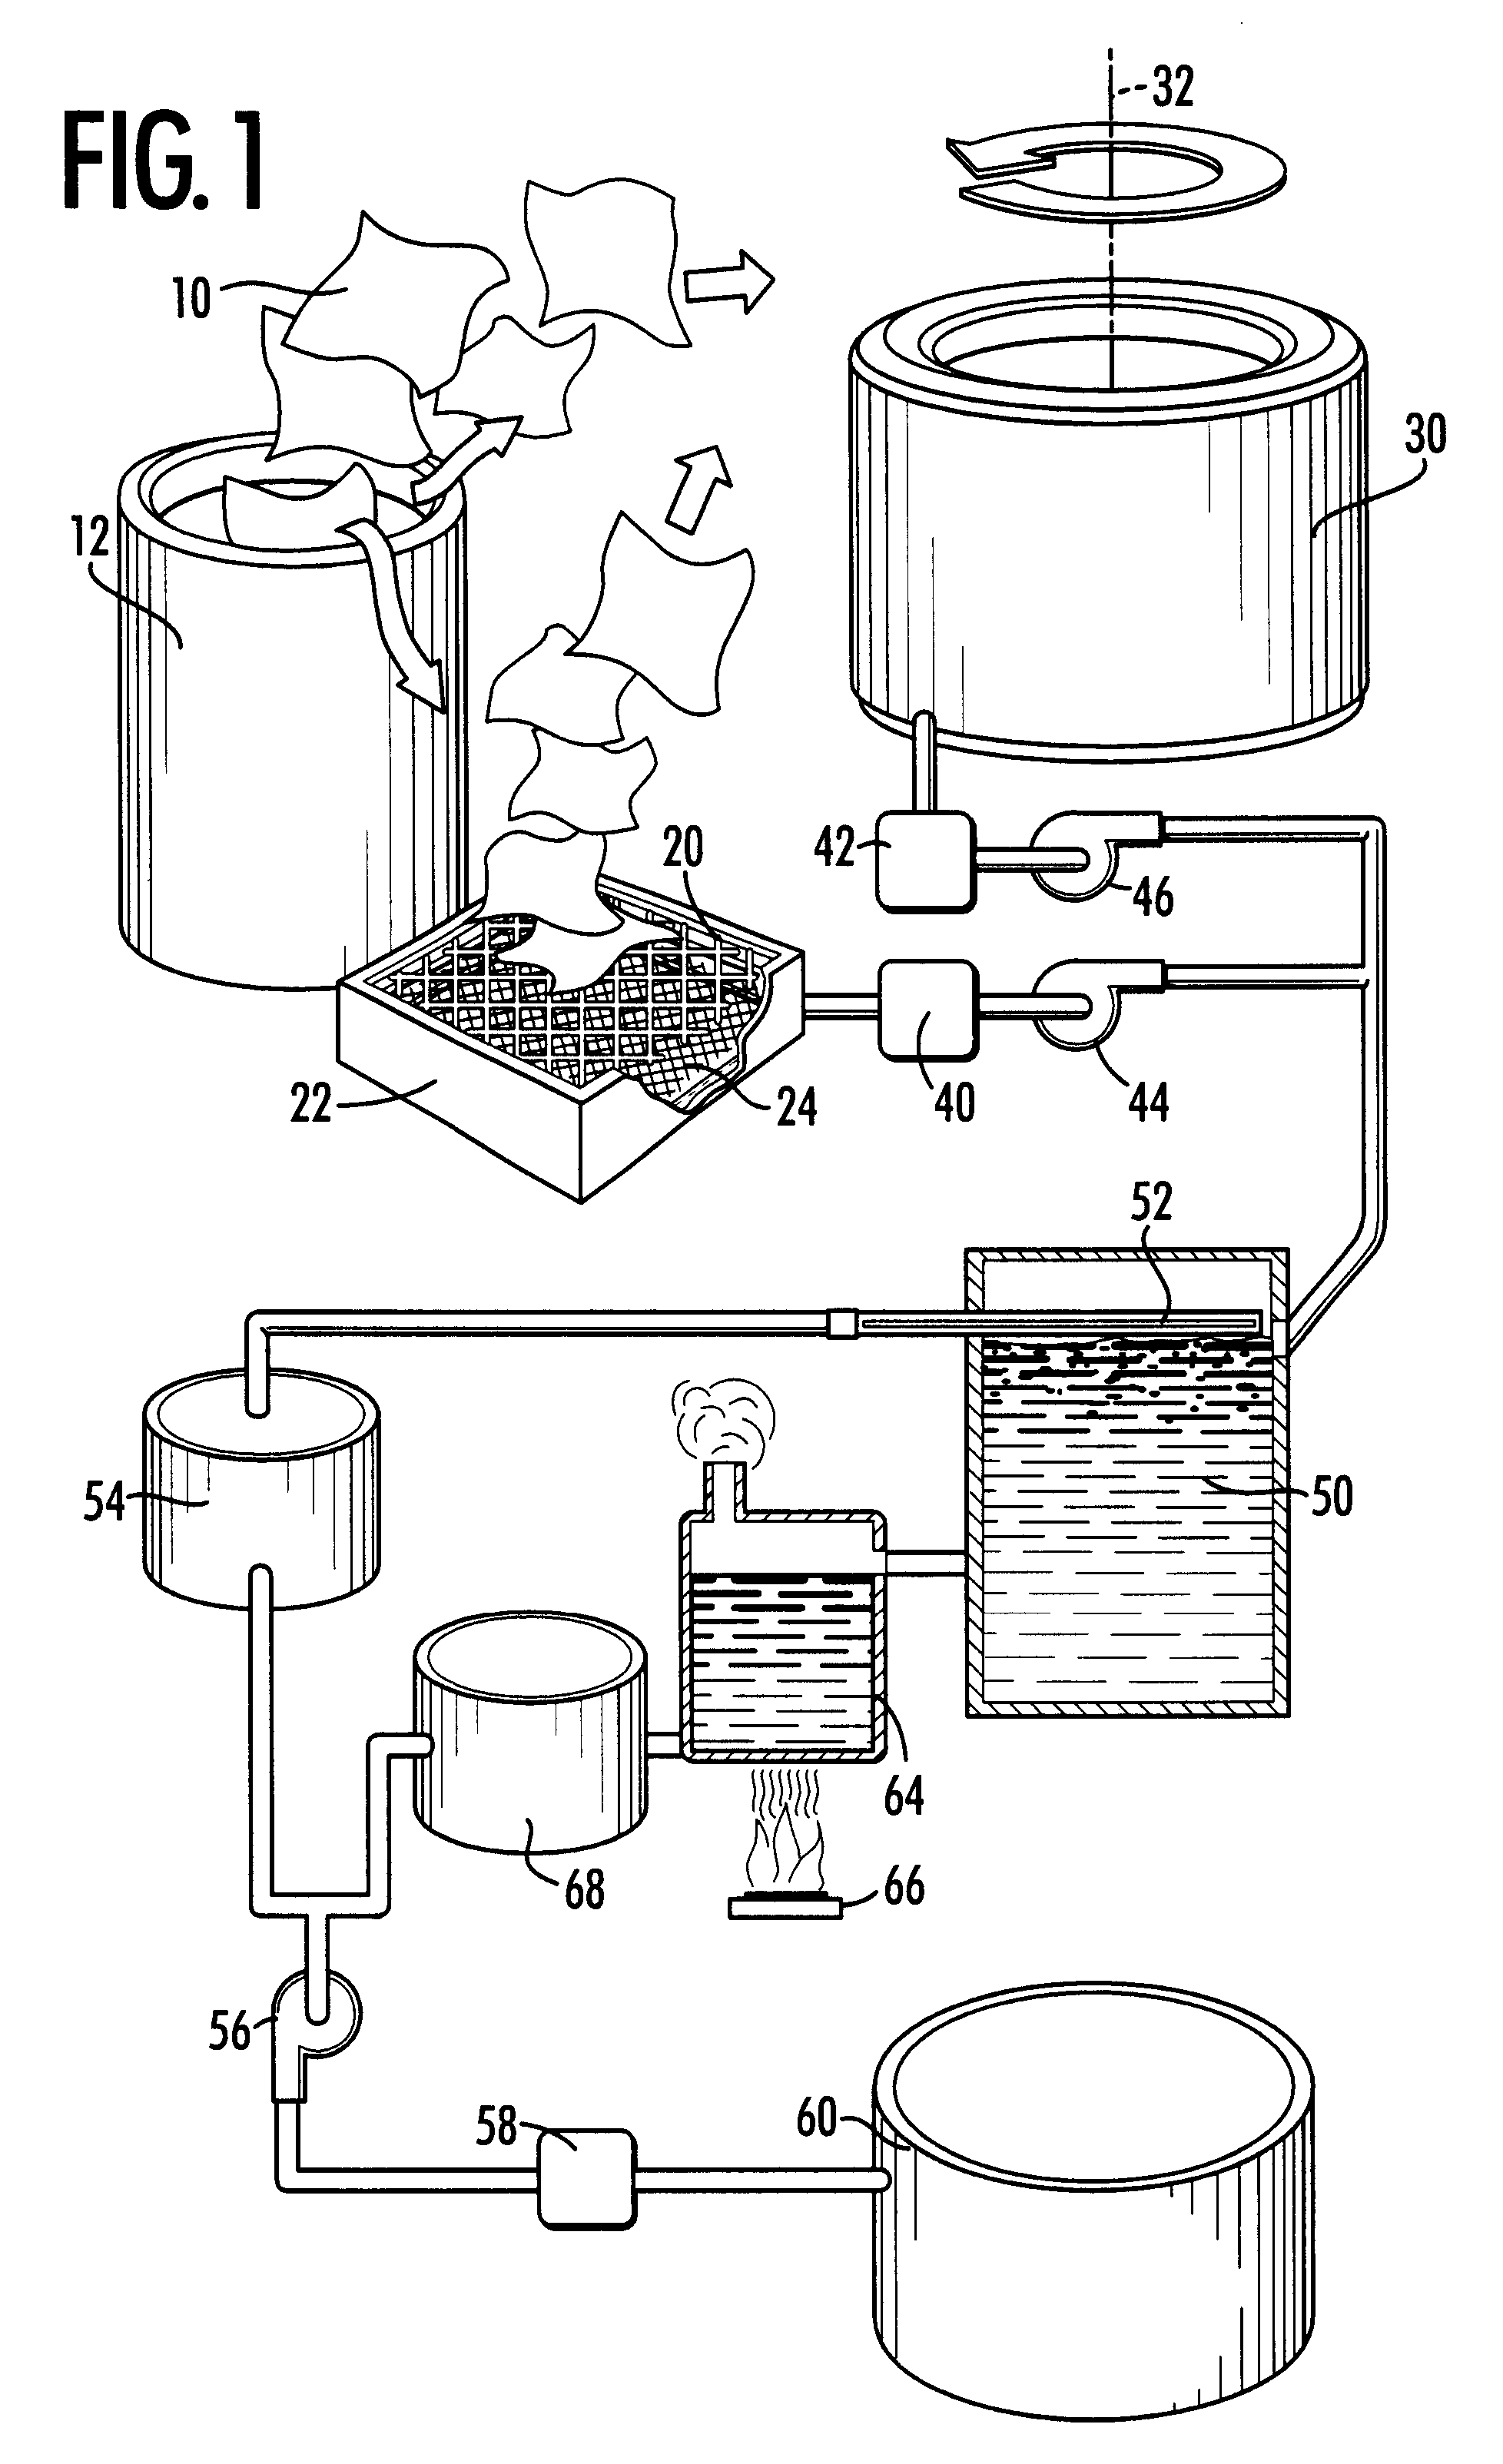 Method and apparatus for cleaning oil absorbent materials